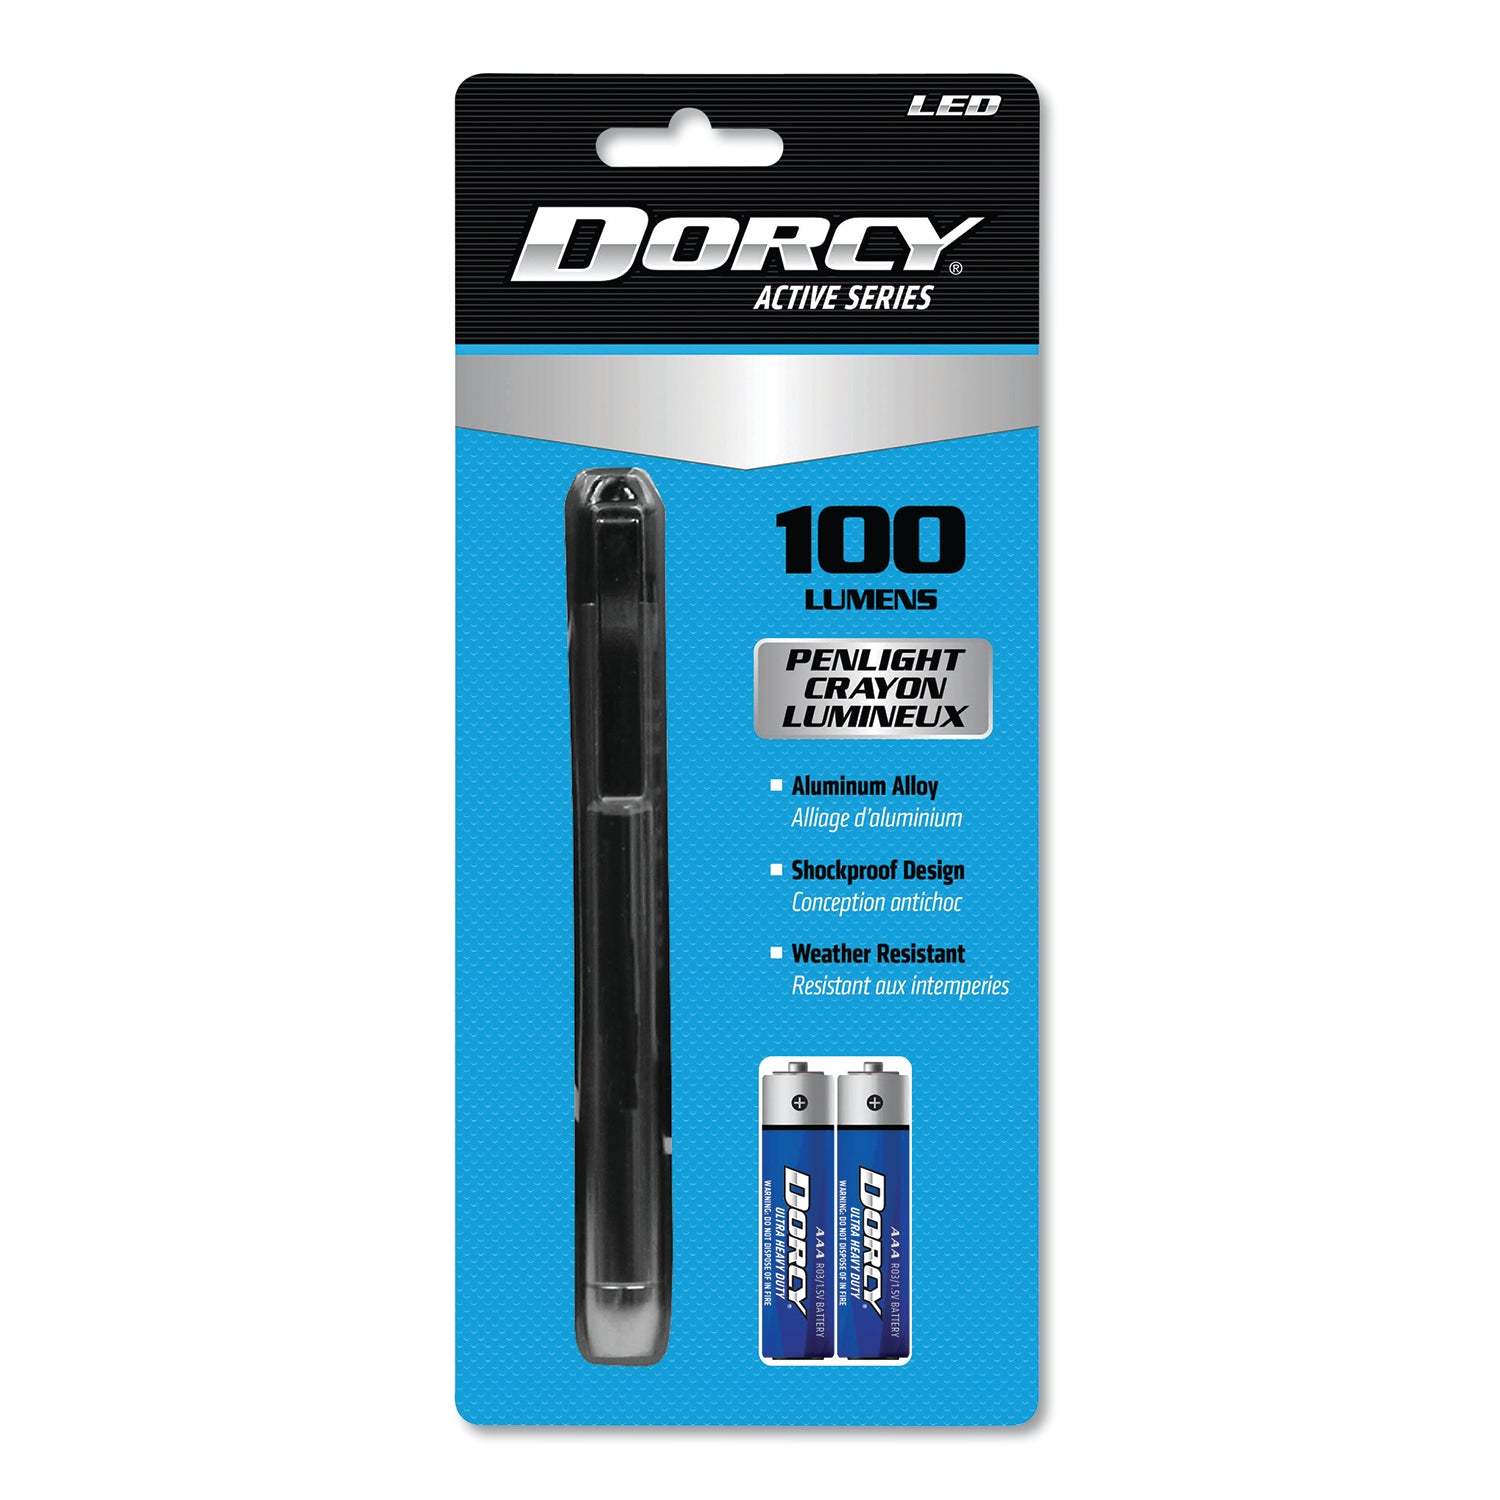 100-lumen-led-penlight-2-aaa-batteries-included-silver_dcy411218 - 1